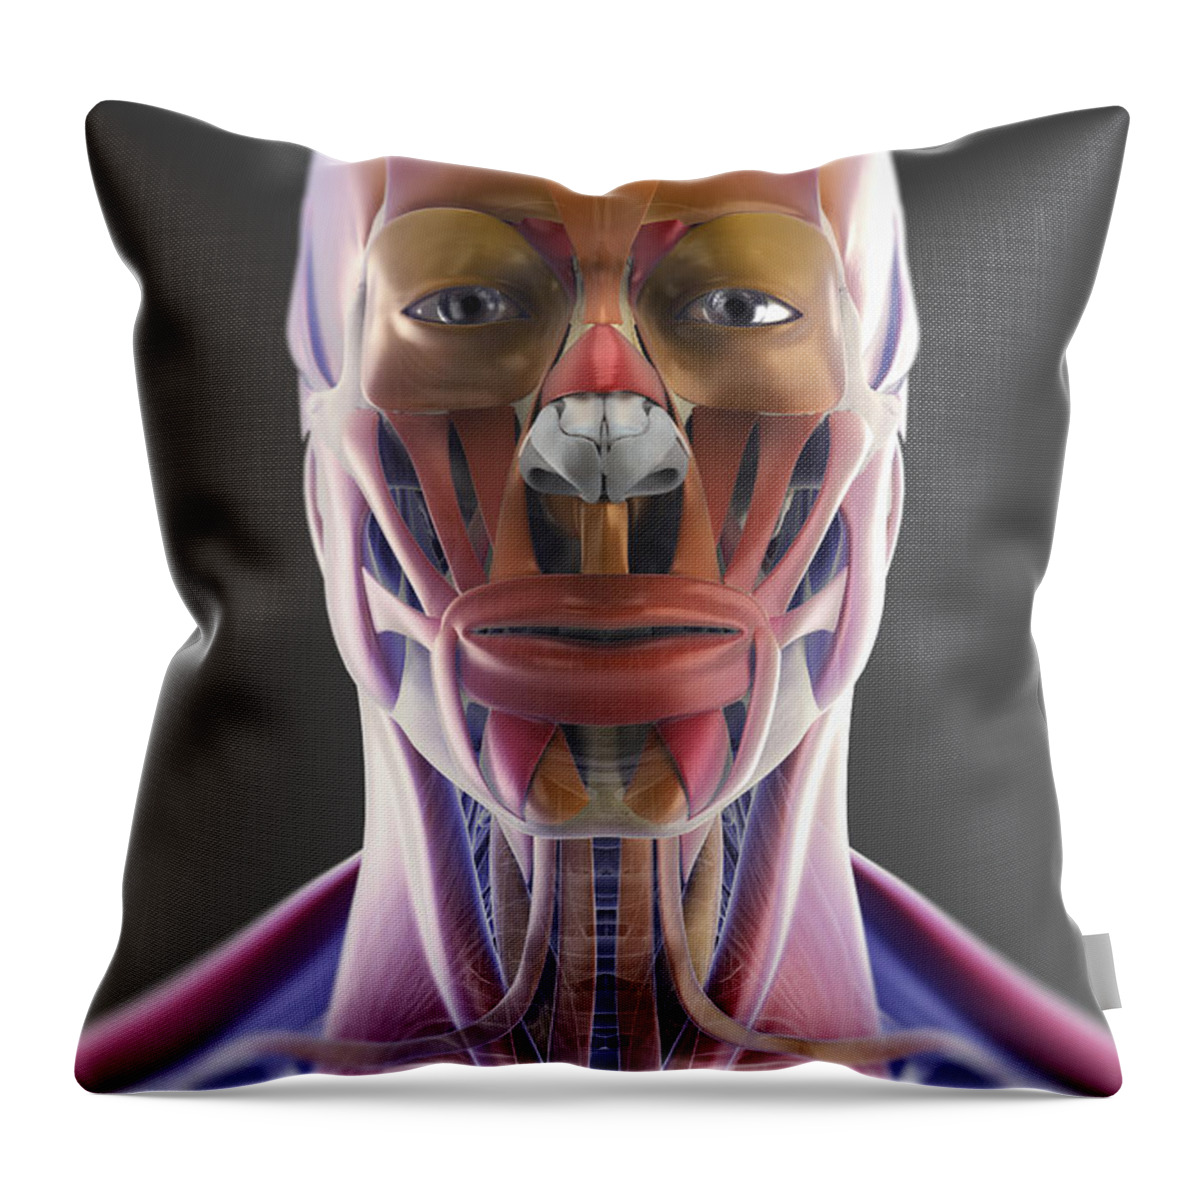 Facial Anatomy Throw Pillow featuring the photograph Muscle Of The Head And Neck by Science Picture Co